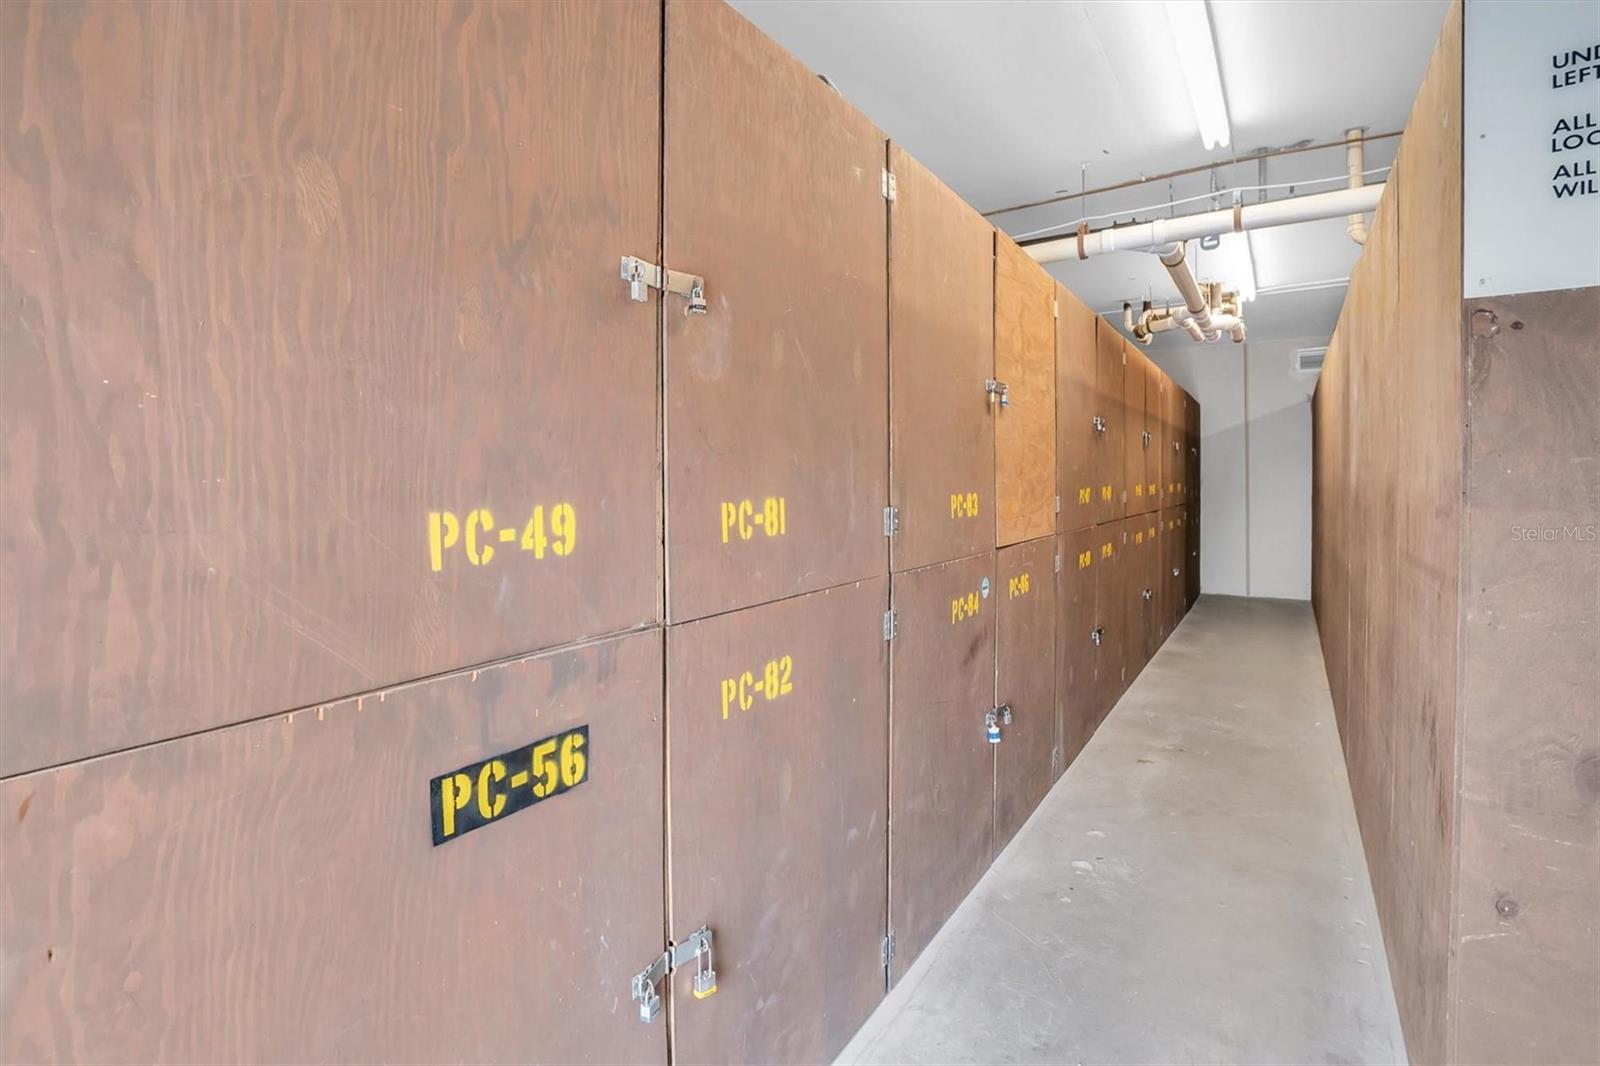 Climate Controlled Storage Rooms in C & D Bldgs with Assigned Storage Space